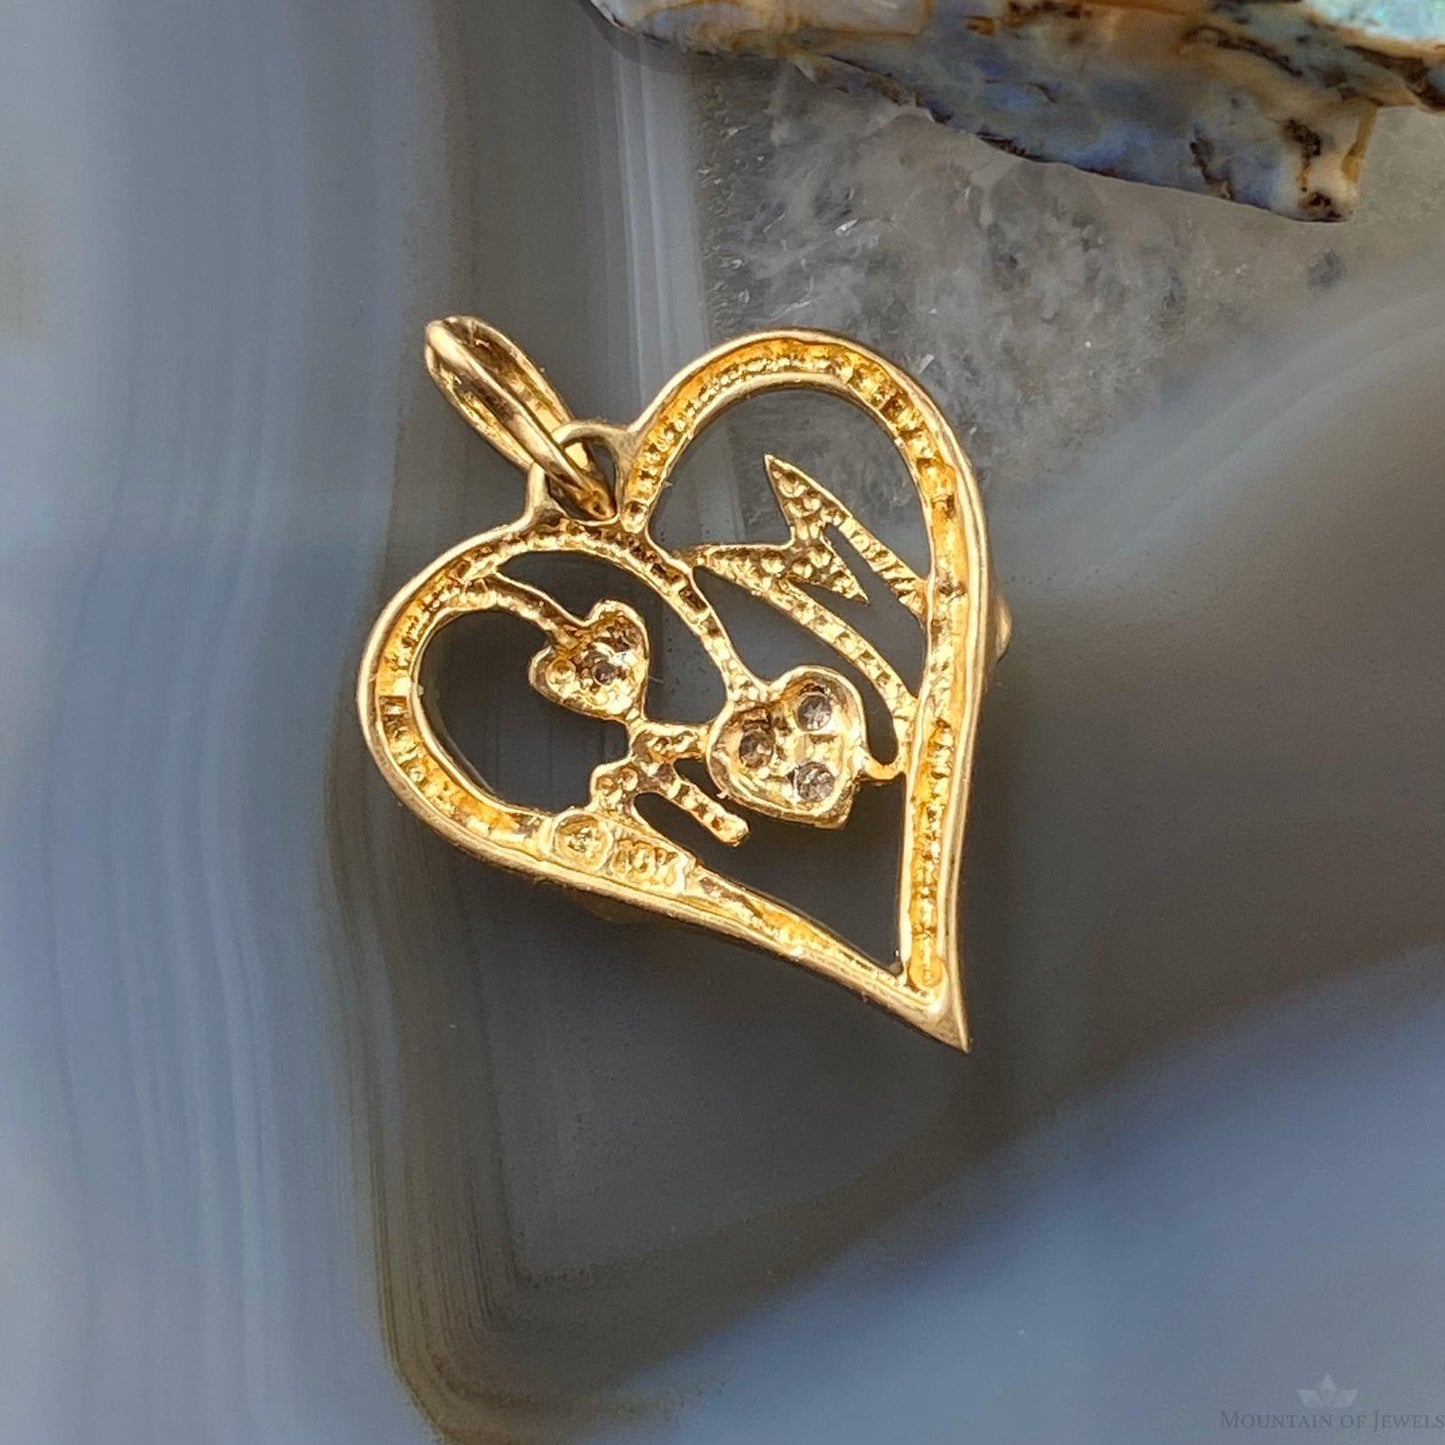 10K Yellow Gold and Diamonds "Mom" Heart Shape Dainty Pendant For Mother